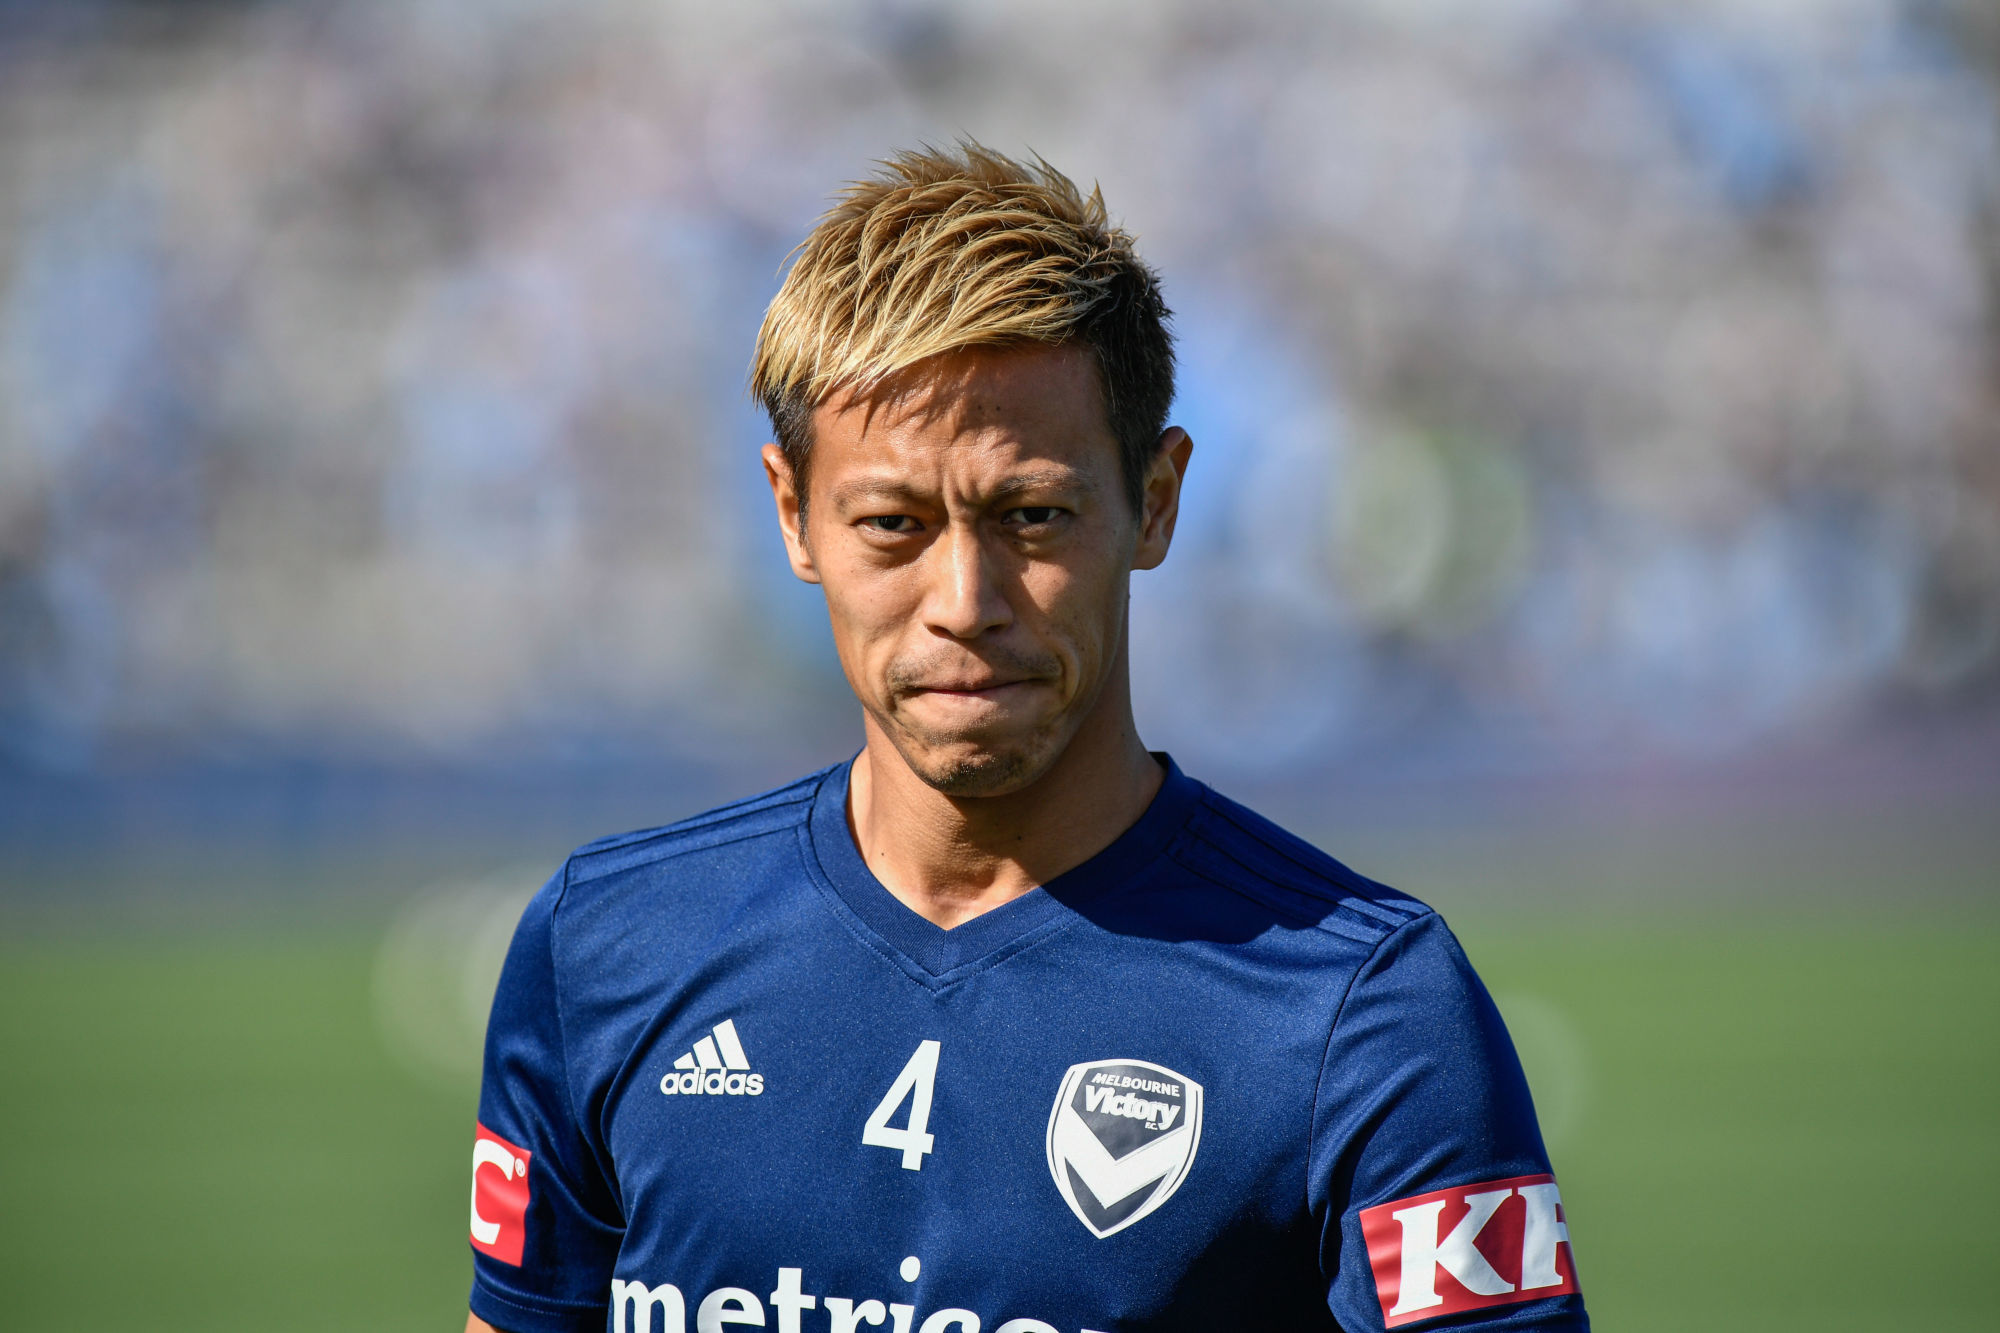 Keisuke Honda of Melbourne Victory during the A League match between Sydney FC and Melbourne Victory, at Jubilee Oval, Sydney, Australia on November 25, 2018.
Photo : Actionplus / Icon Sport